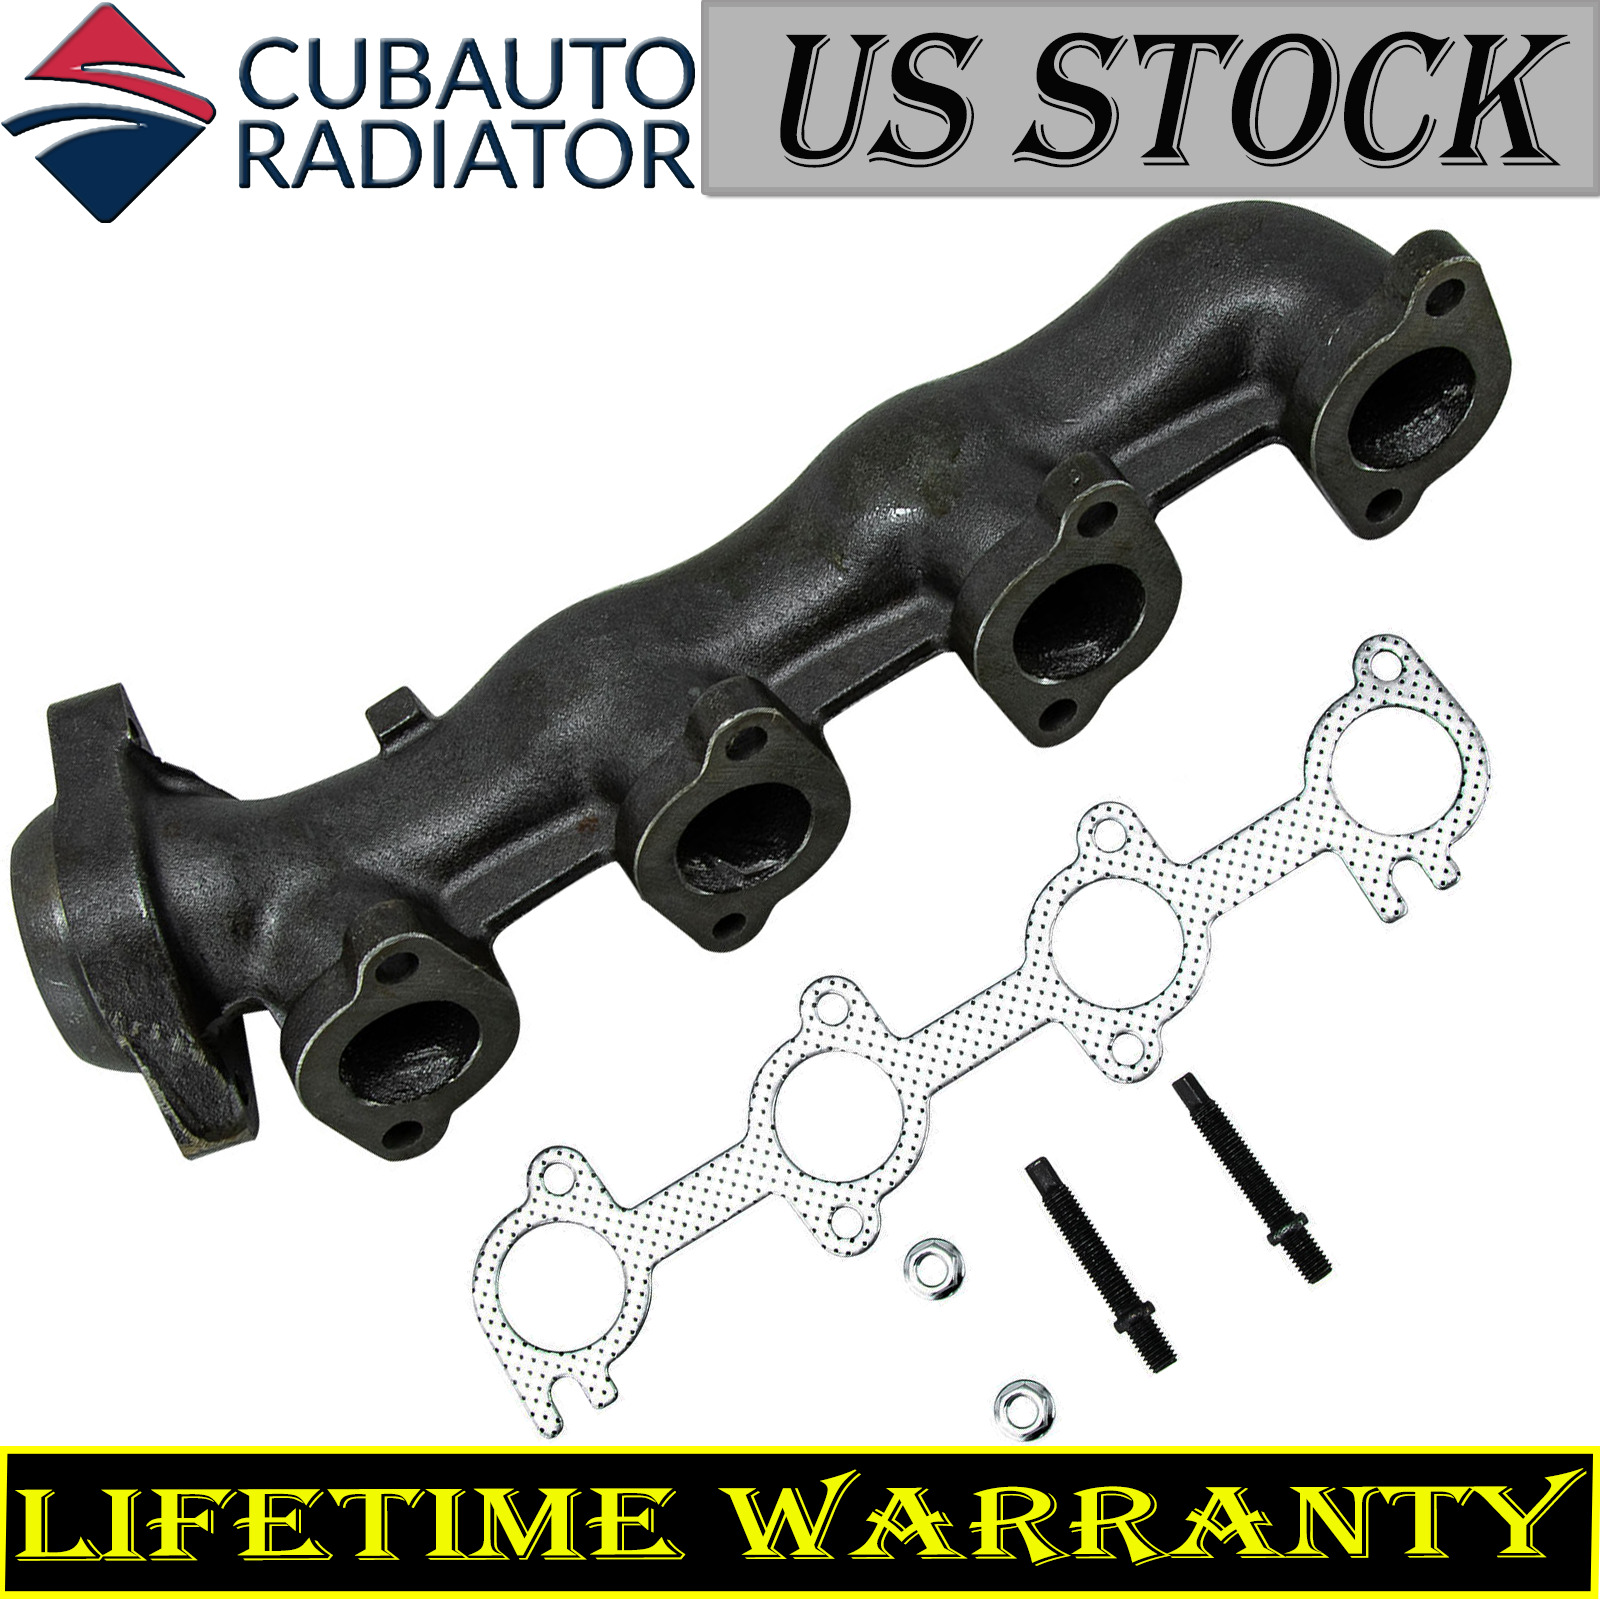 Exhaust Manifold Right For 1997-1998 F-Series Expedition Pickup Truck 4.6L 280ci